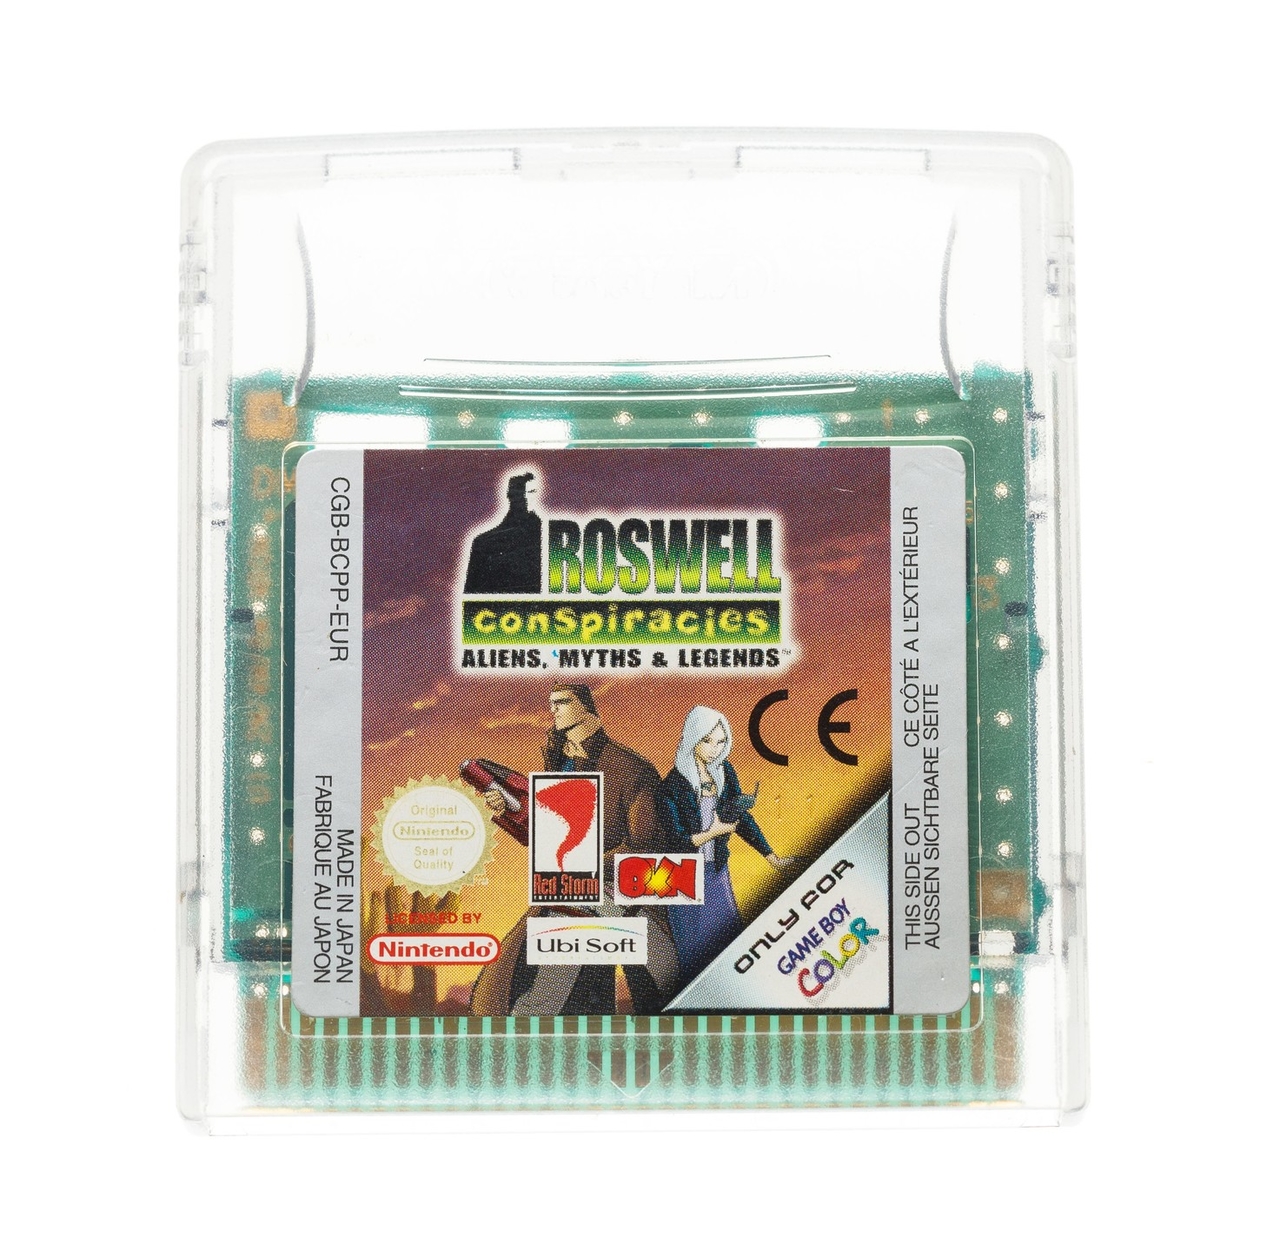 Roswell Conspiracies: Aliens, Myths & Legends - Gameboy Color Games